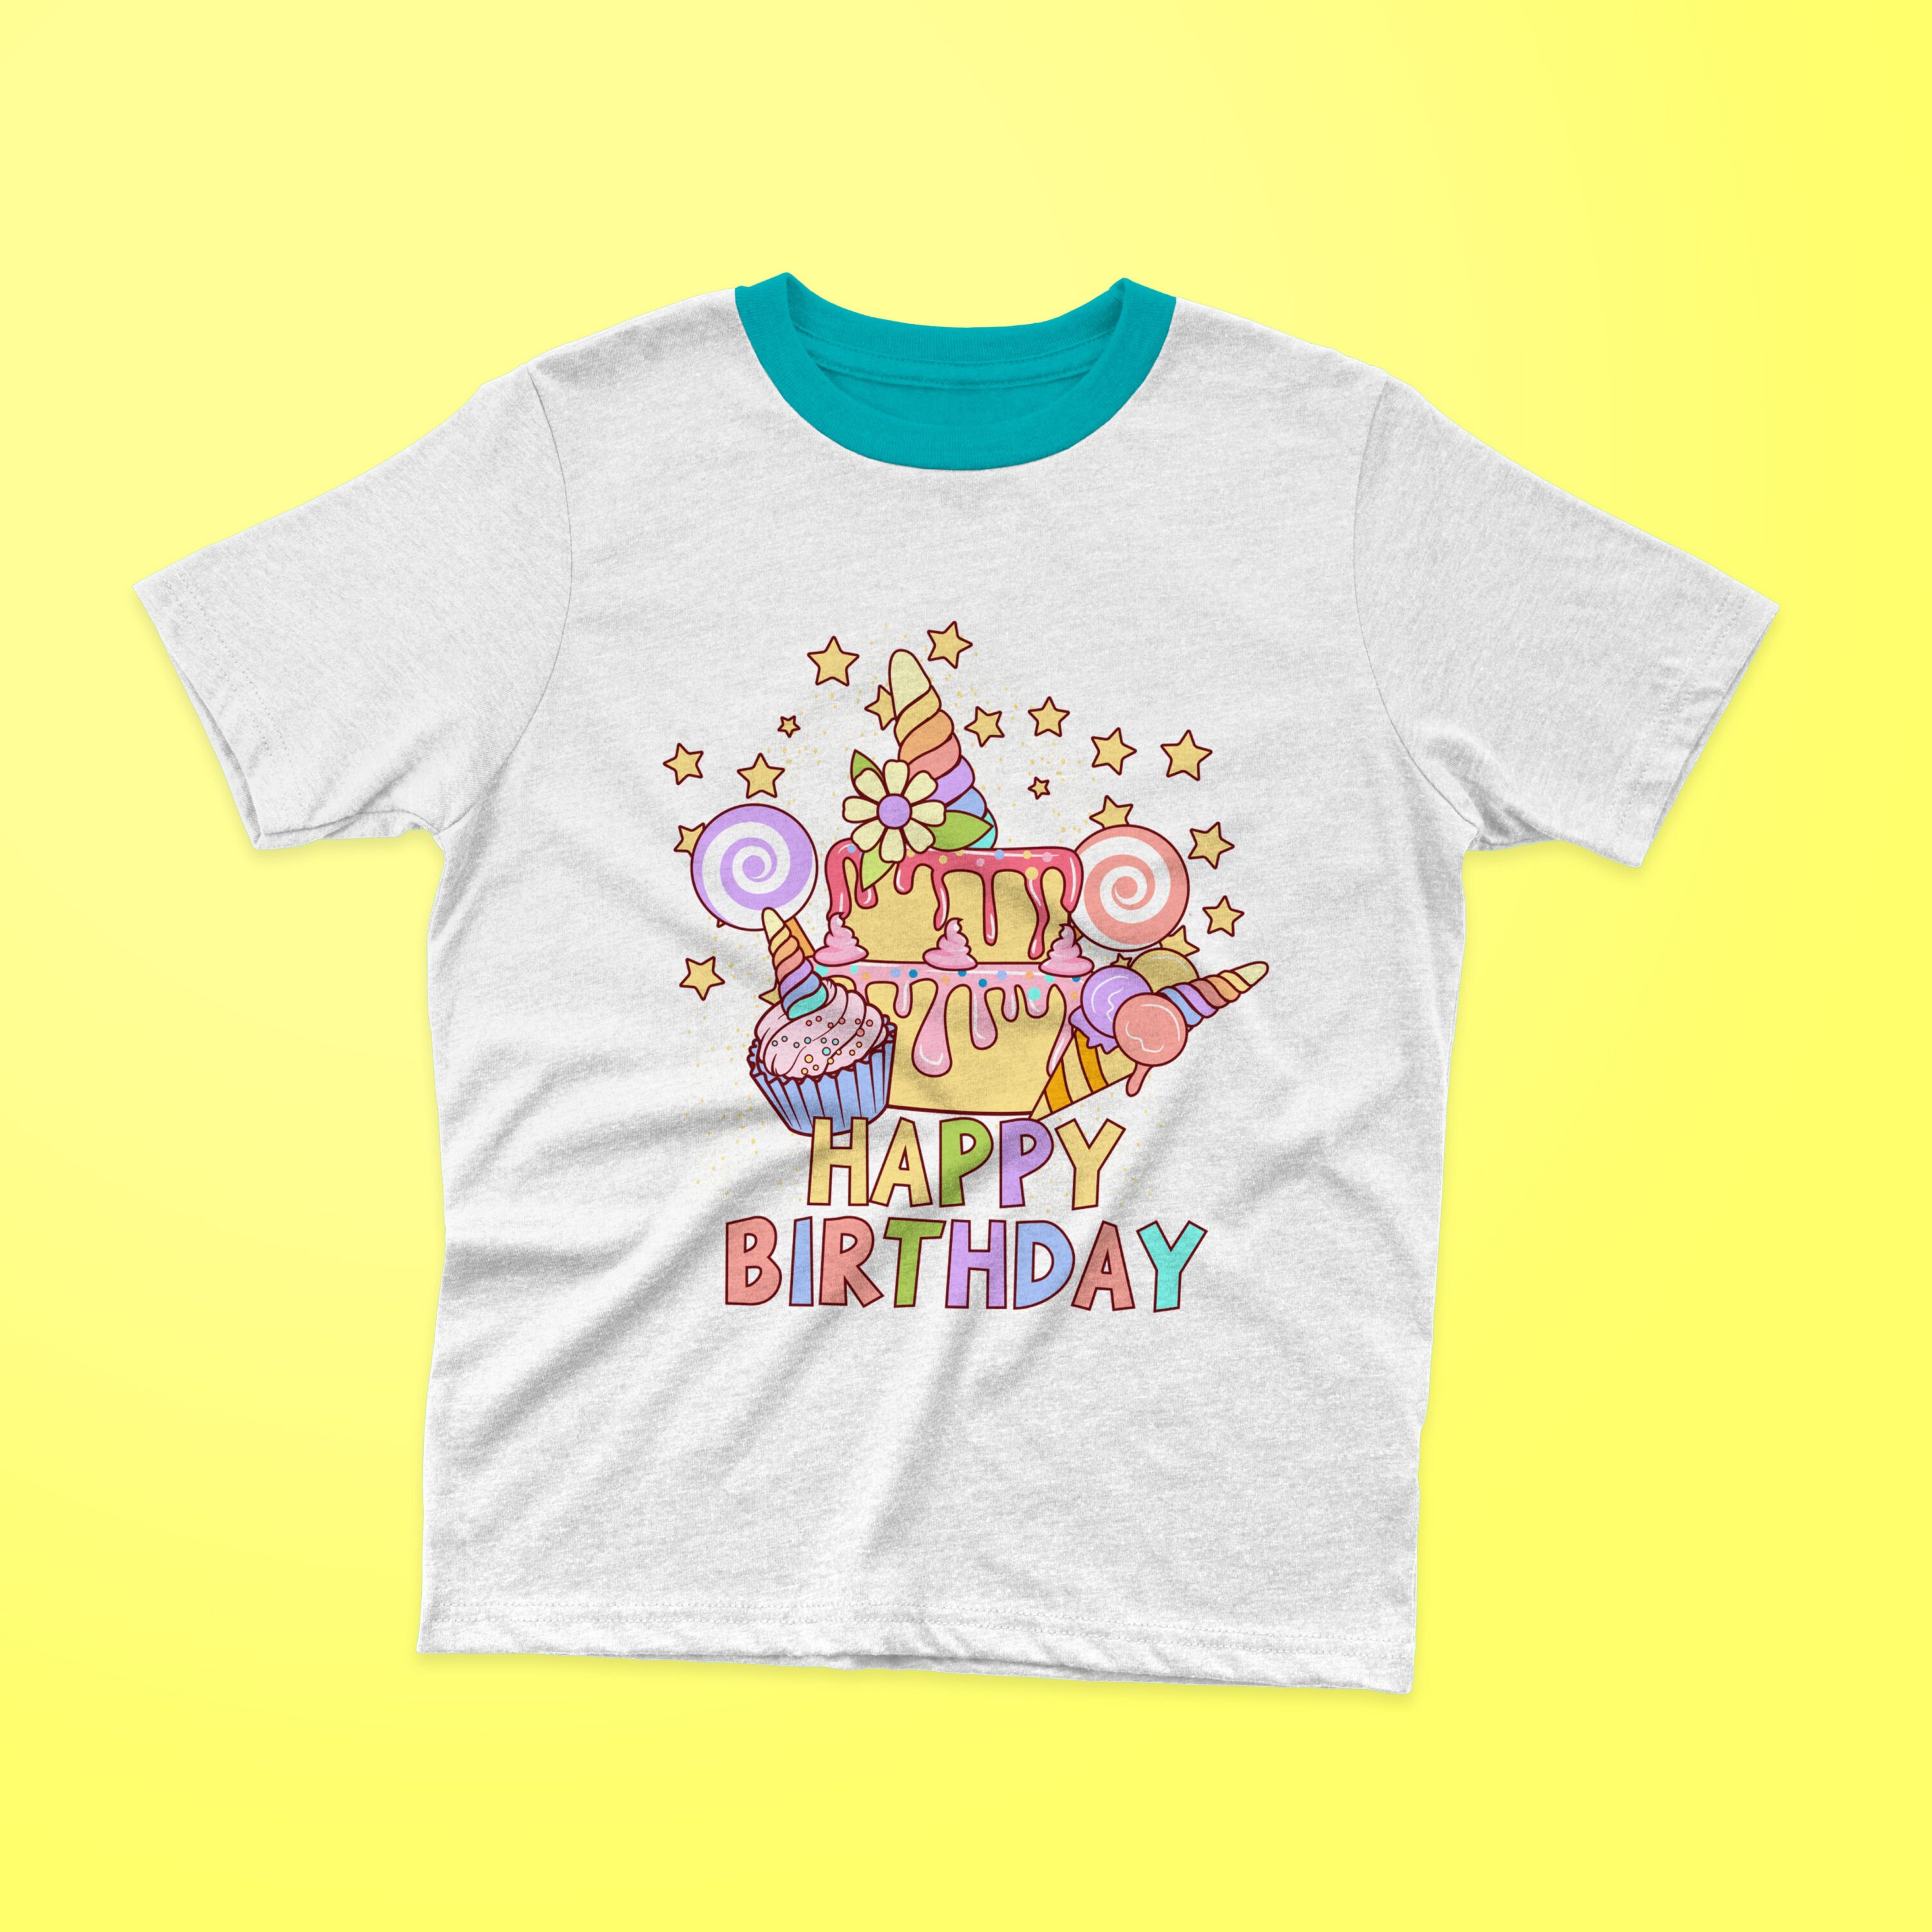 White t-shirt with a turquoise collar and a birthday cake with colorful lettering "HAPPY BIRTHDAY" on a yellow background.